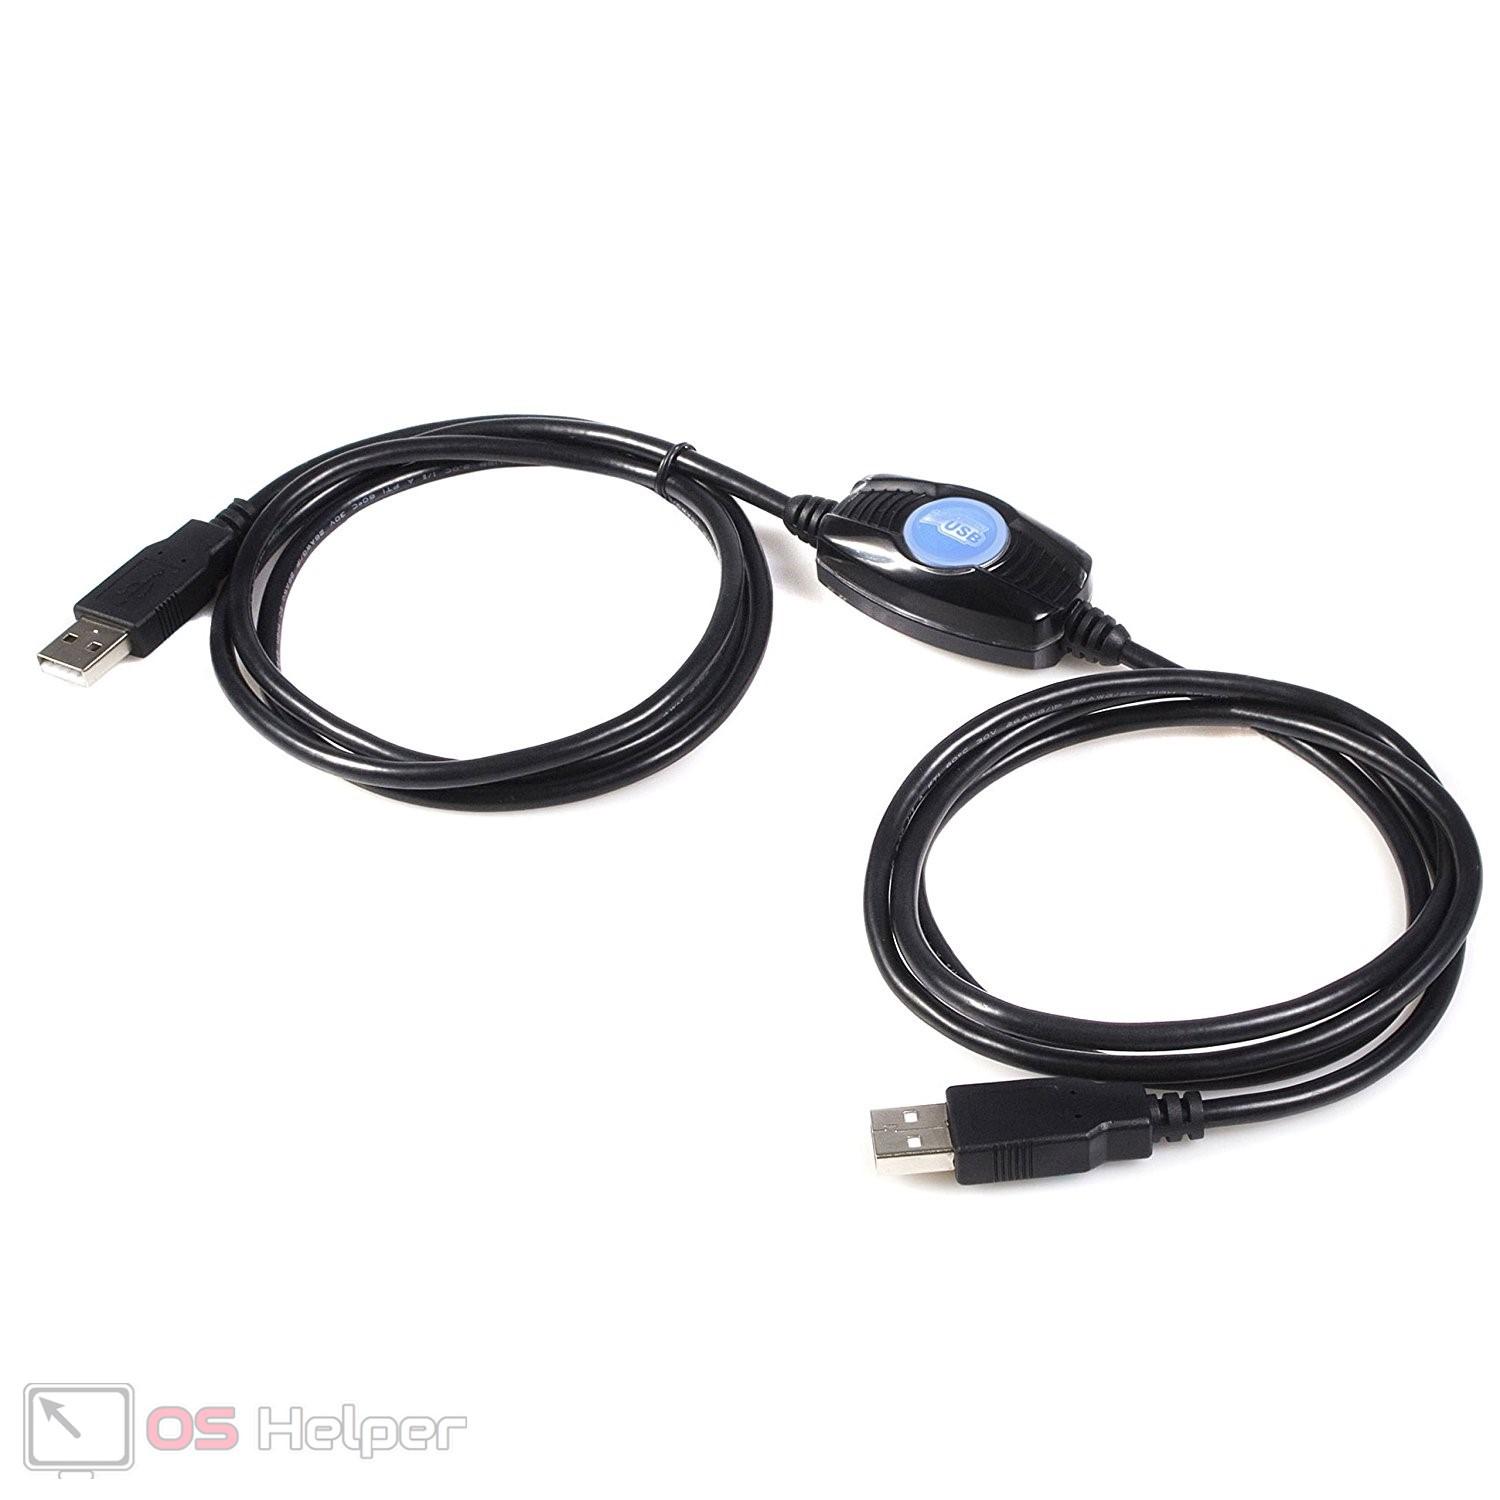 Windows Easy Transfer Cable